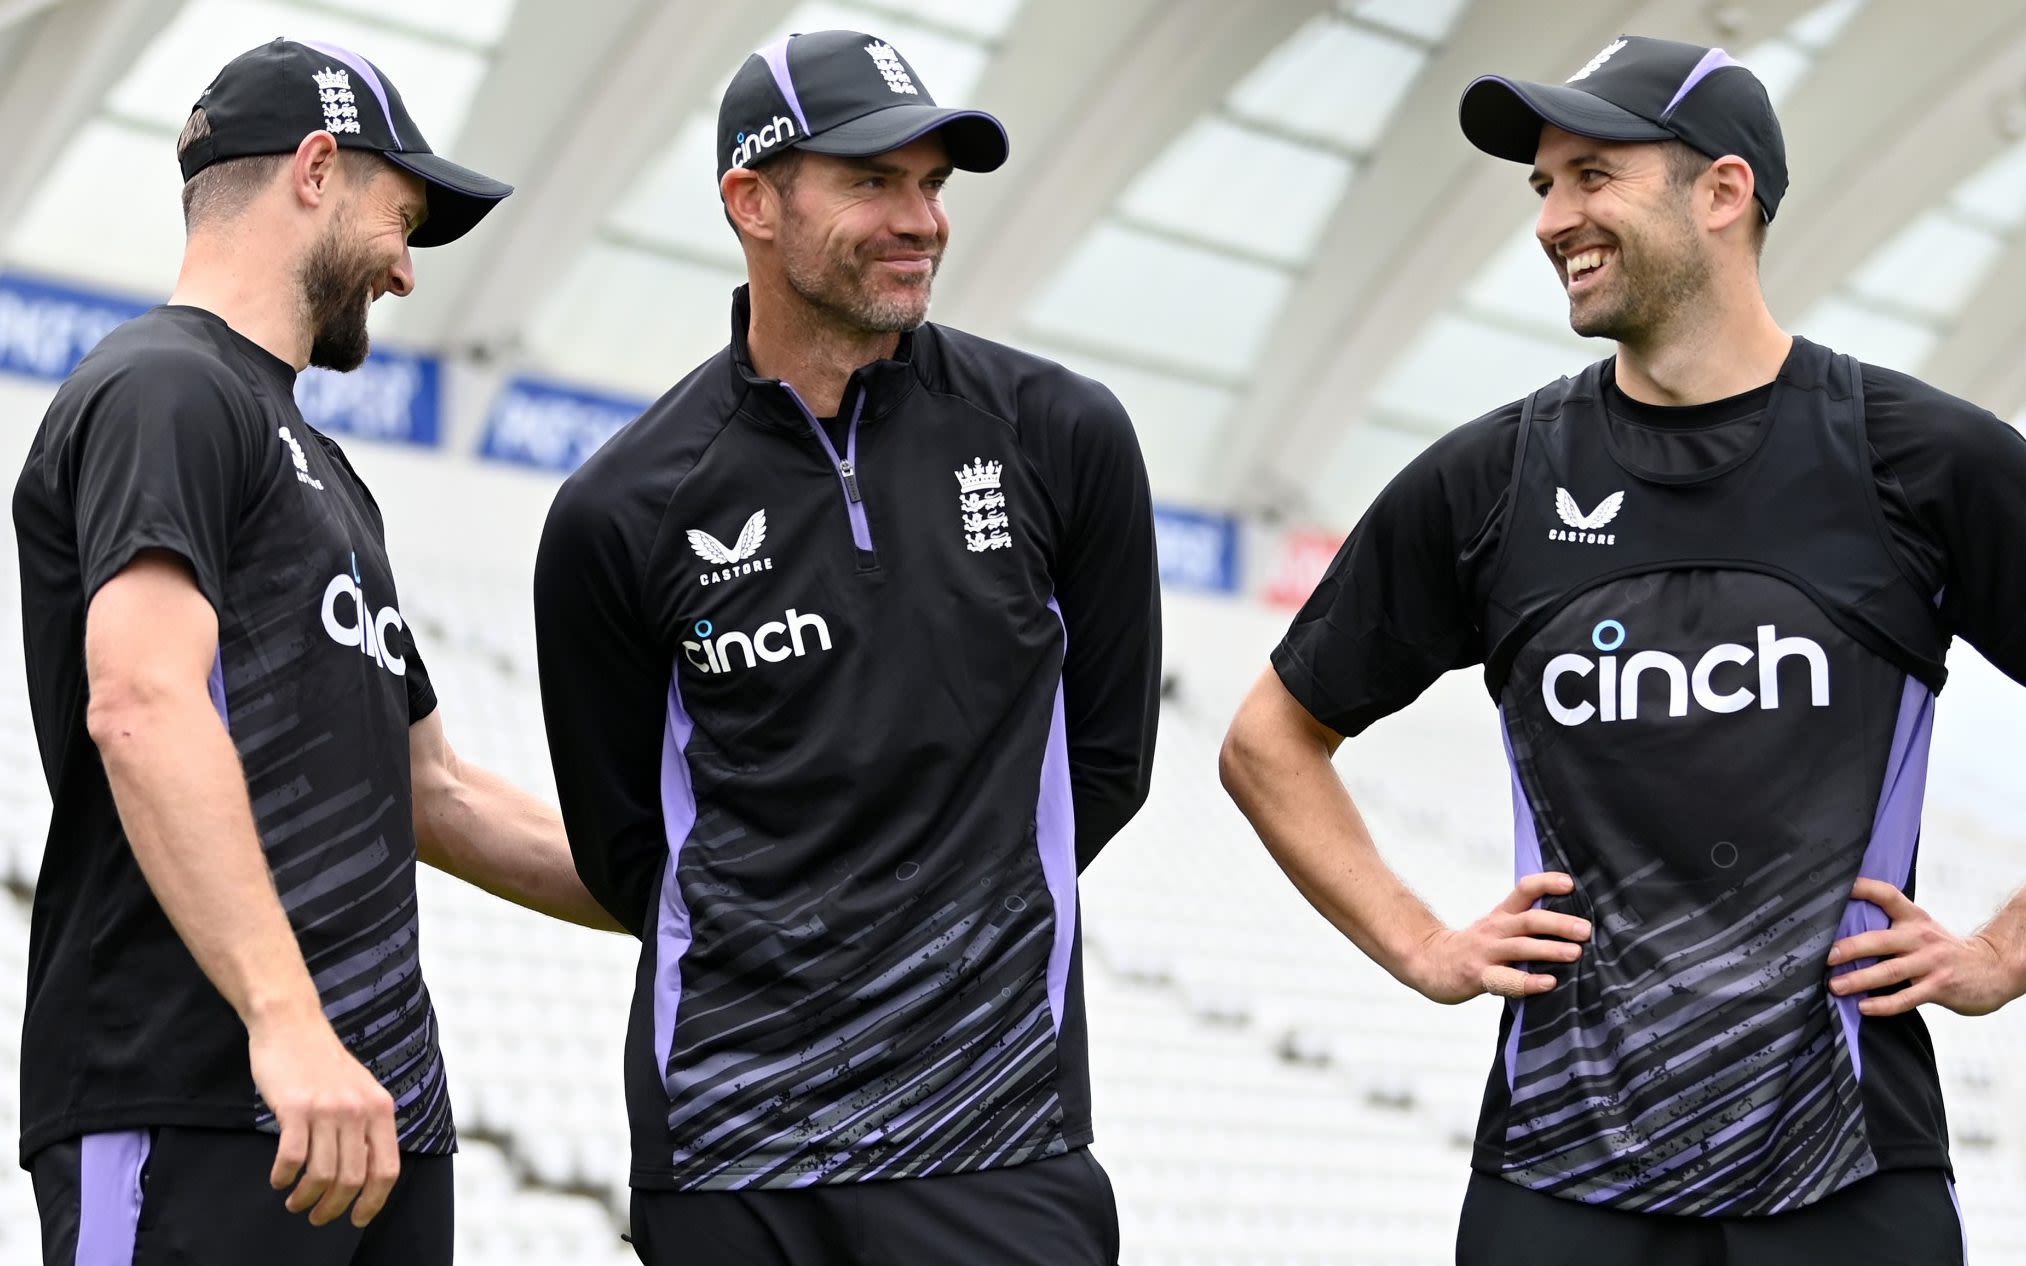 Mark Wood replaces James Anderson for West Indies Test as England legend begins coaching role